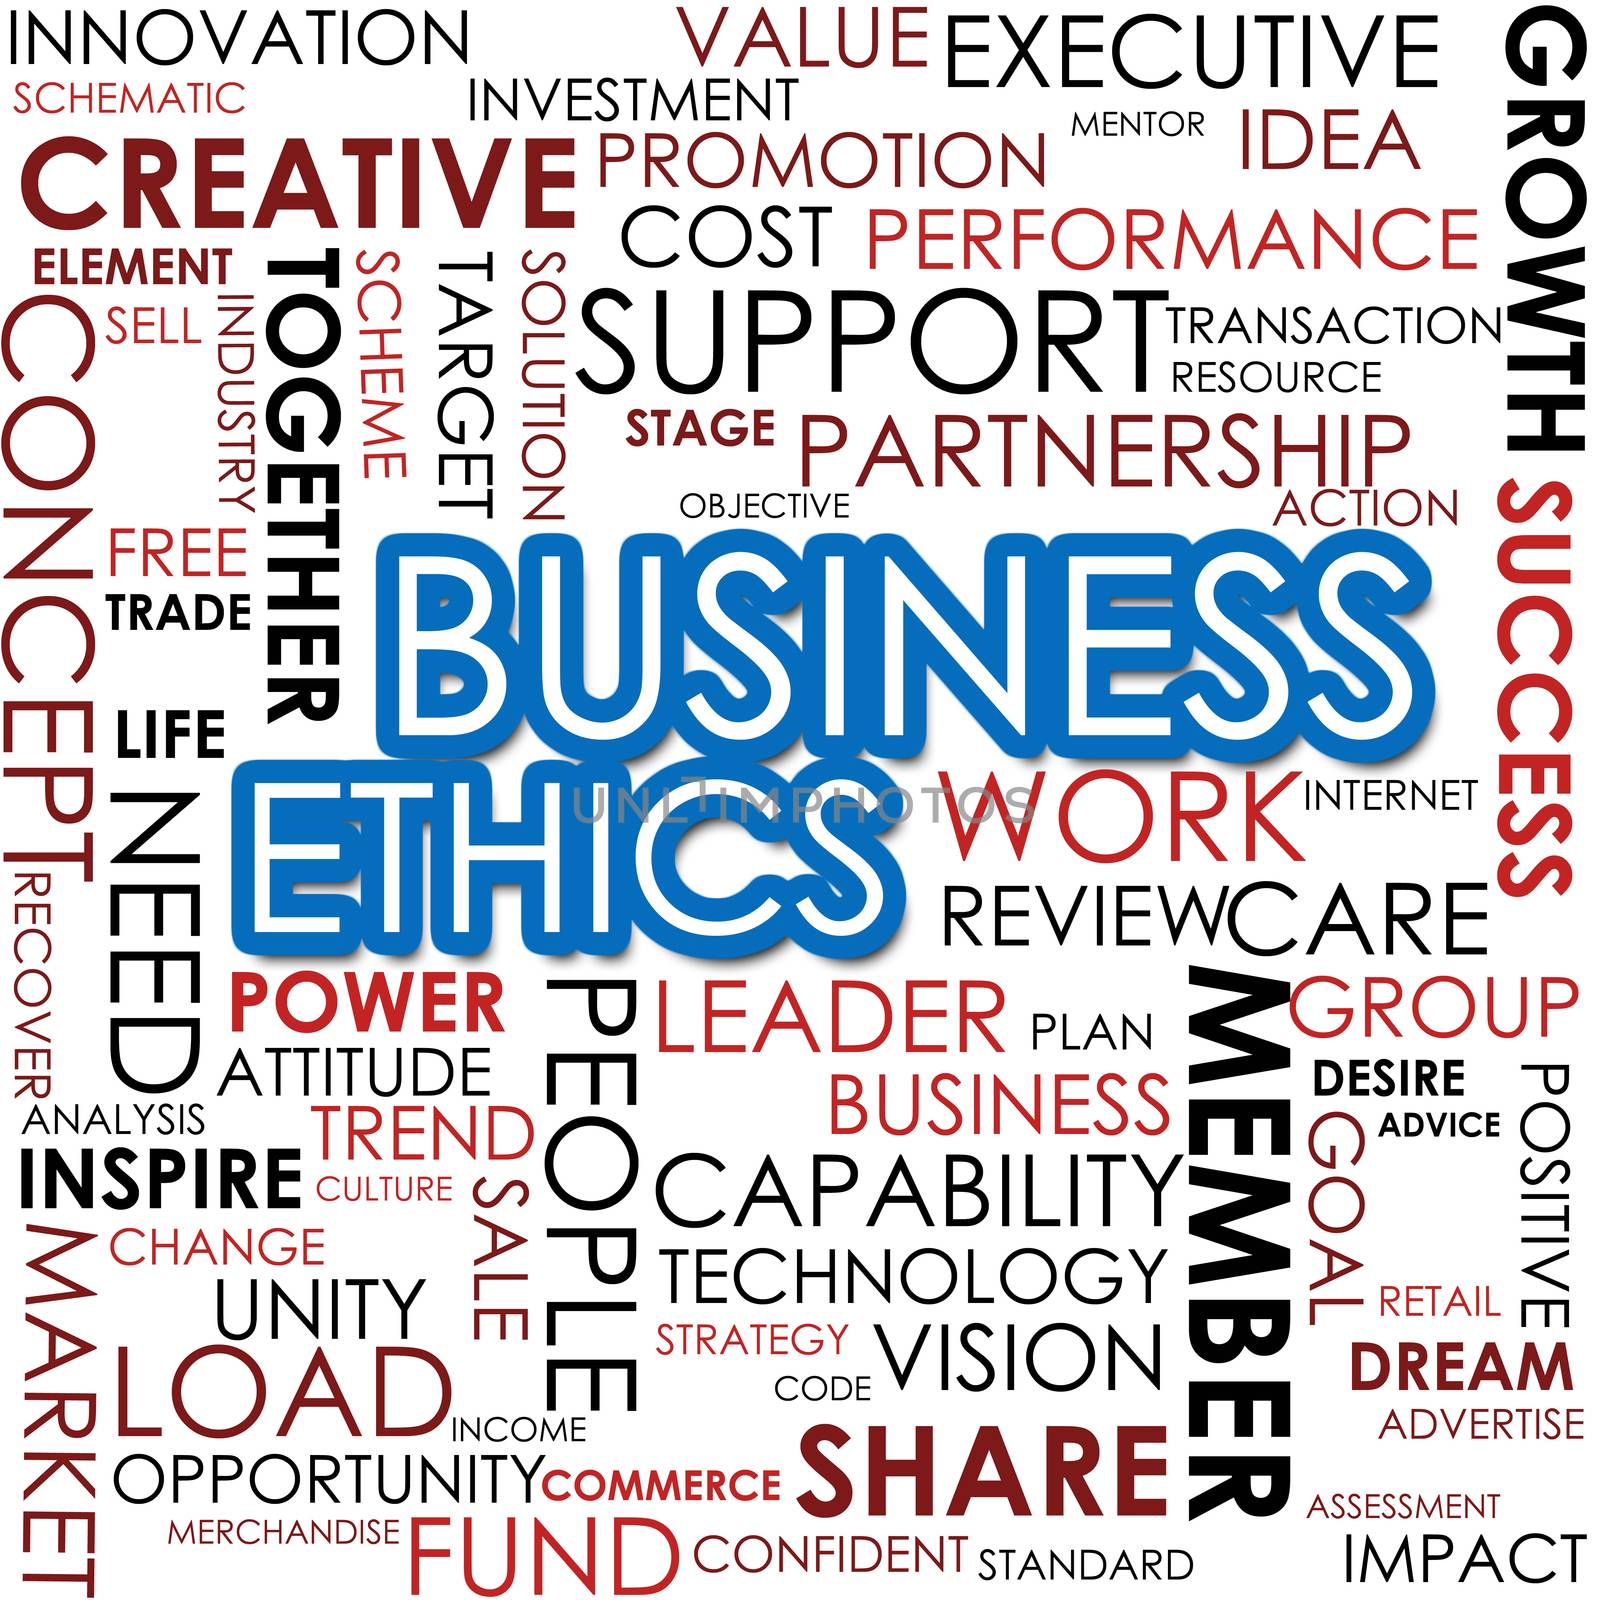 Business ethics word cloud by tang90246